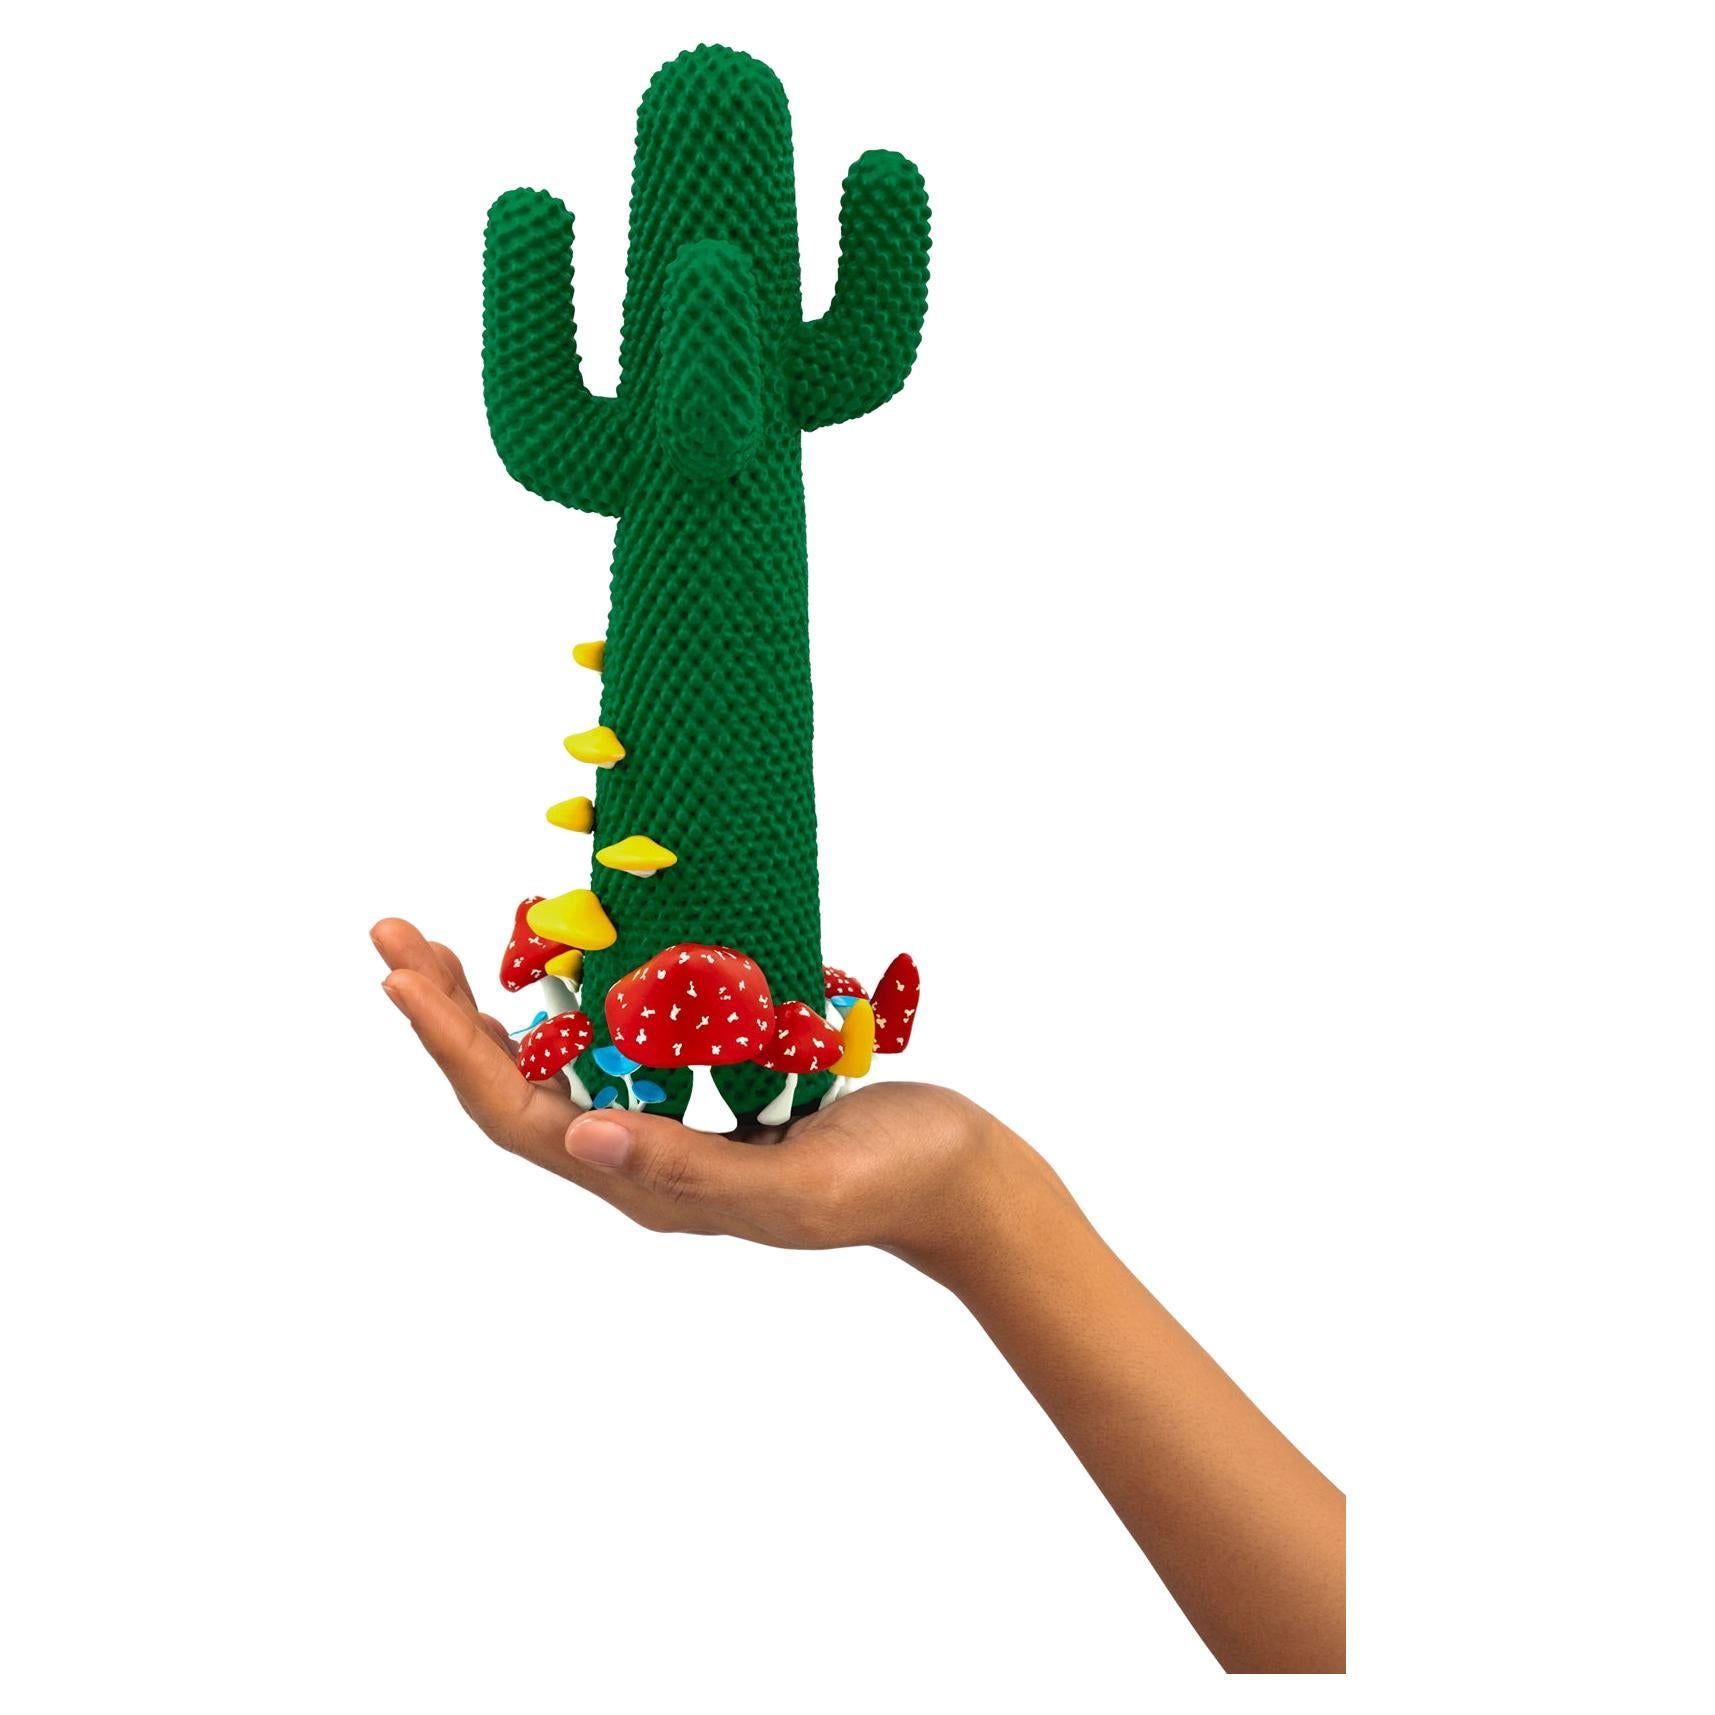 Limited edition #25/99

Gufram presents the miniaturised version of the Shroom CACTUS® created in collaboration with A$AP Rocky and the artist’s new design studio HOMMEMADE Exactly as the real-size Shroom CACTUS®, the new Guframini piece features